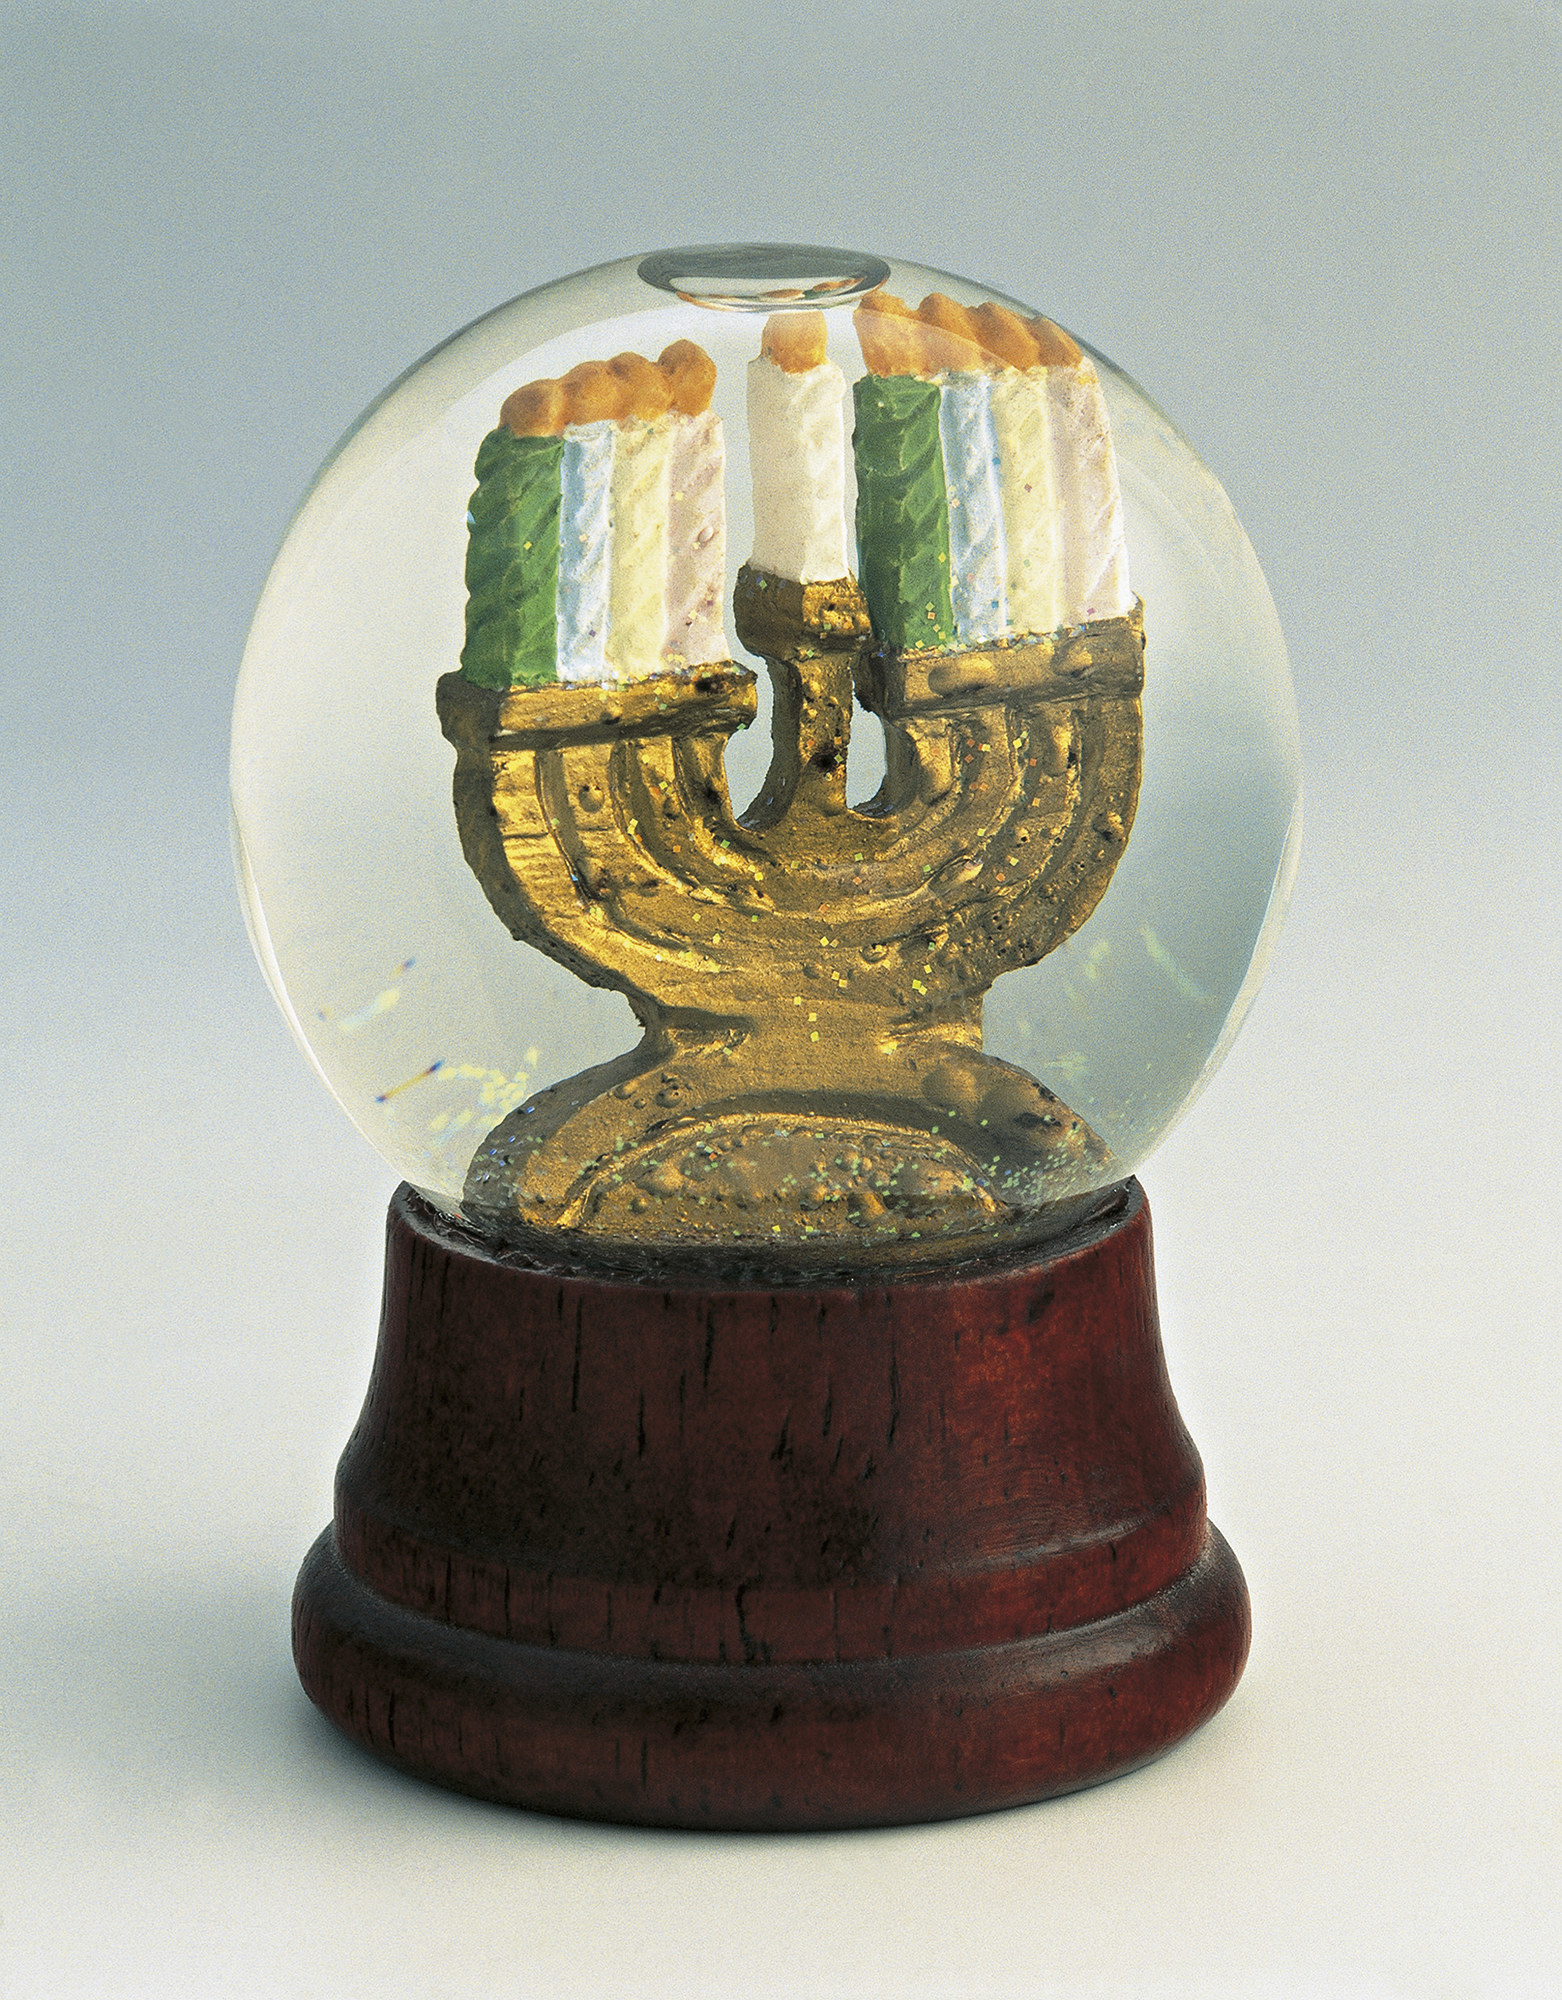 A snow globe with a menorah inside, on a white background